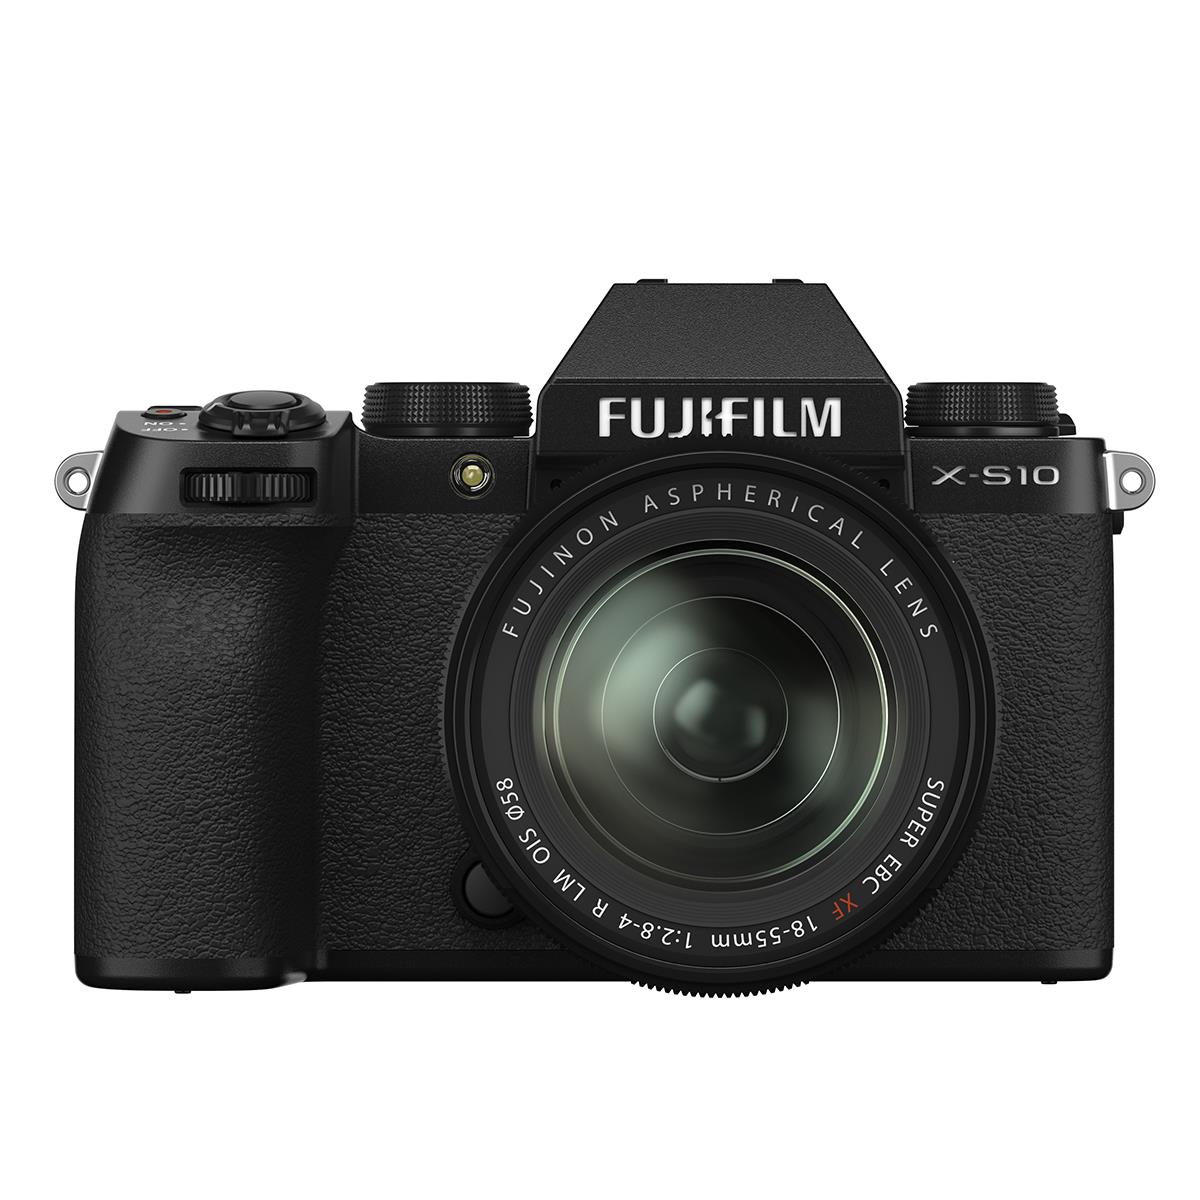 Image of Fujifilm X-S10 Mirrorless Camera with XF 18-55mm f/2.8-4 R Lens